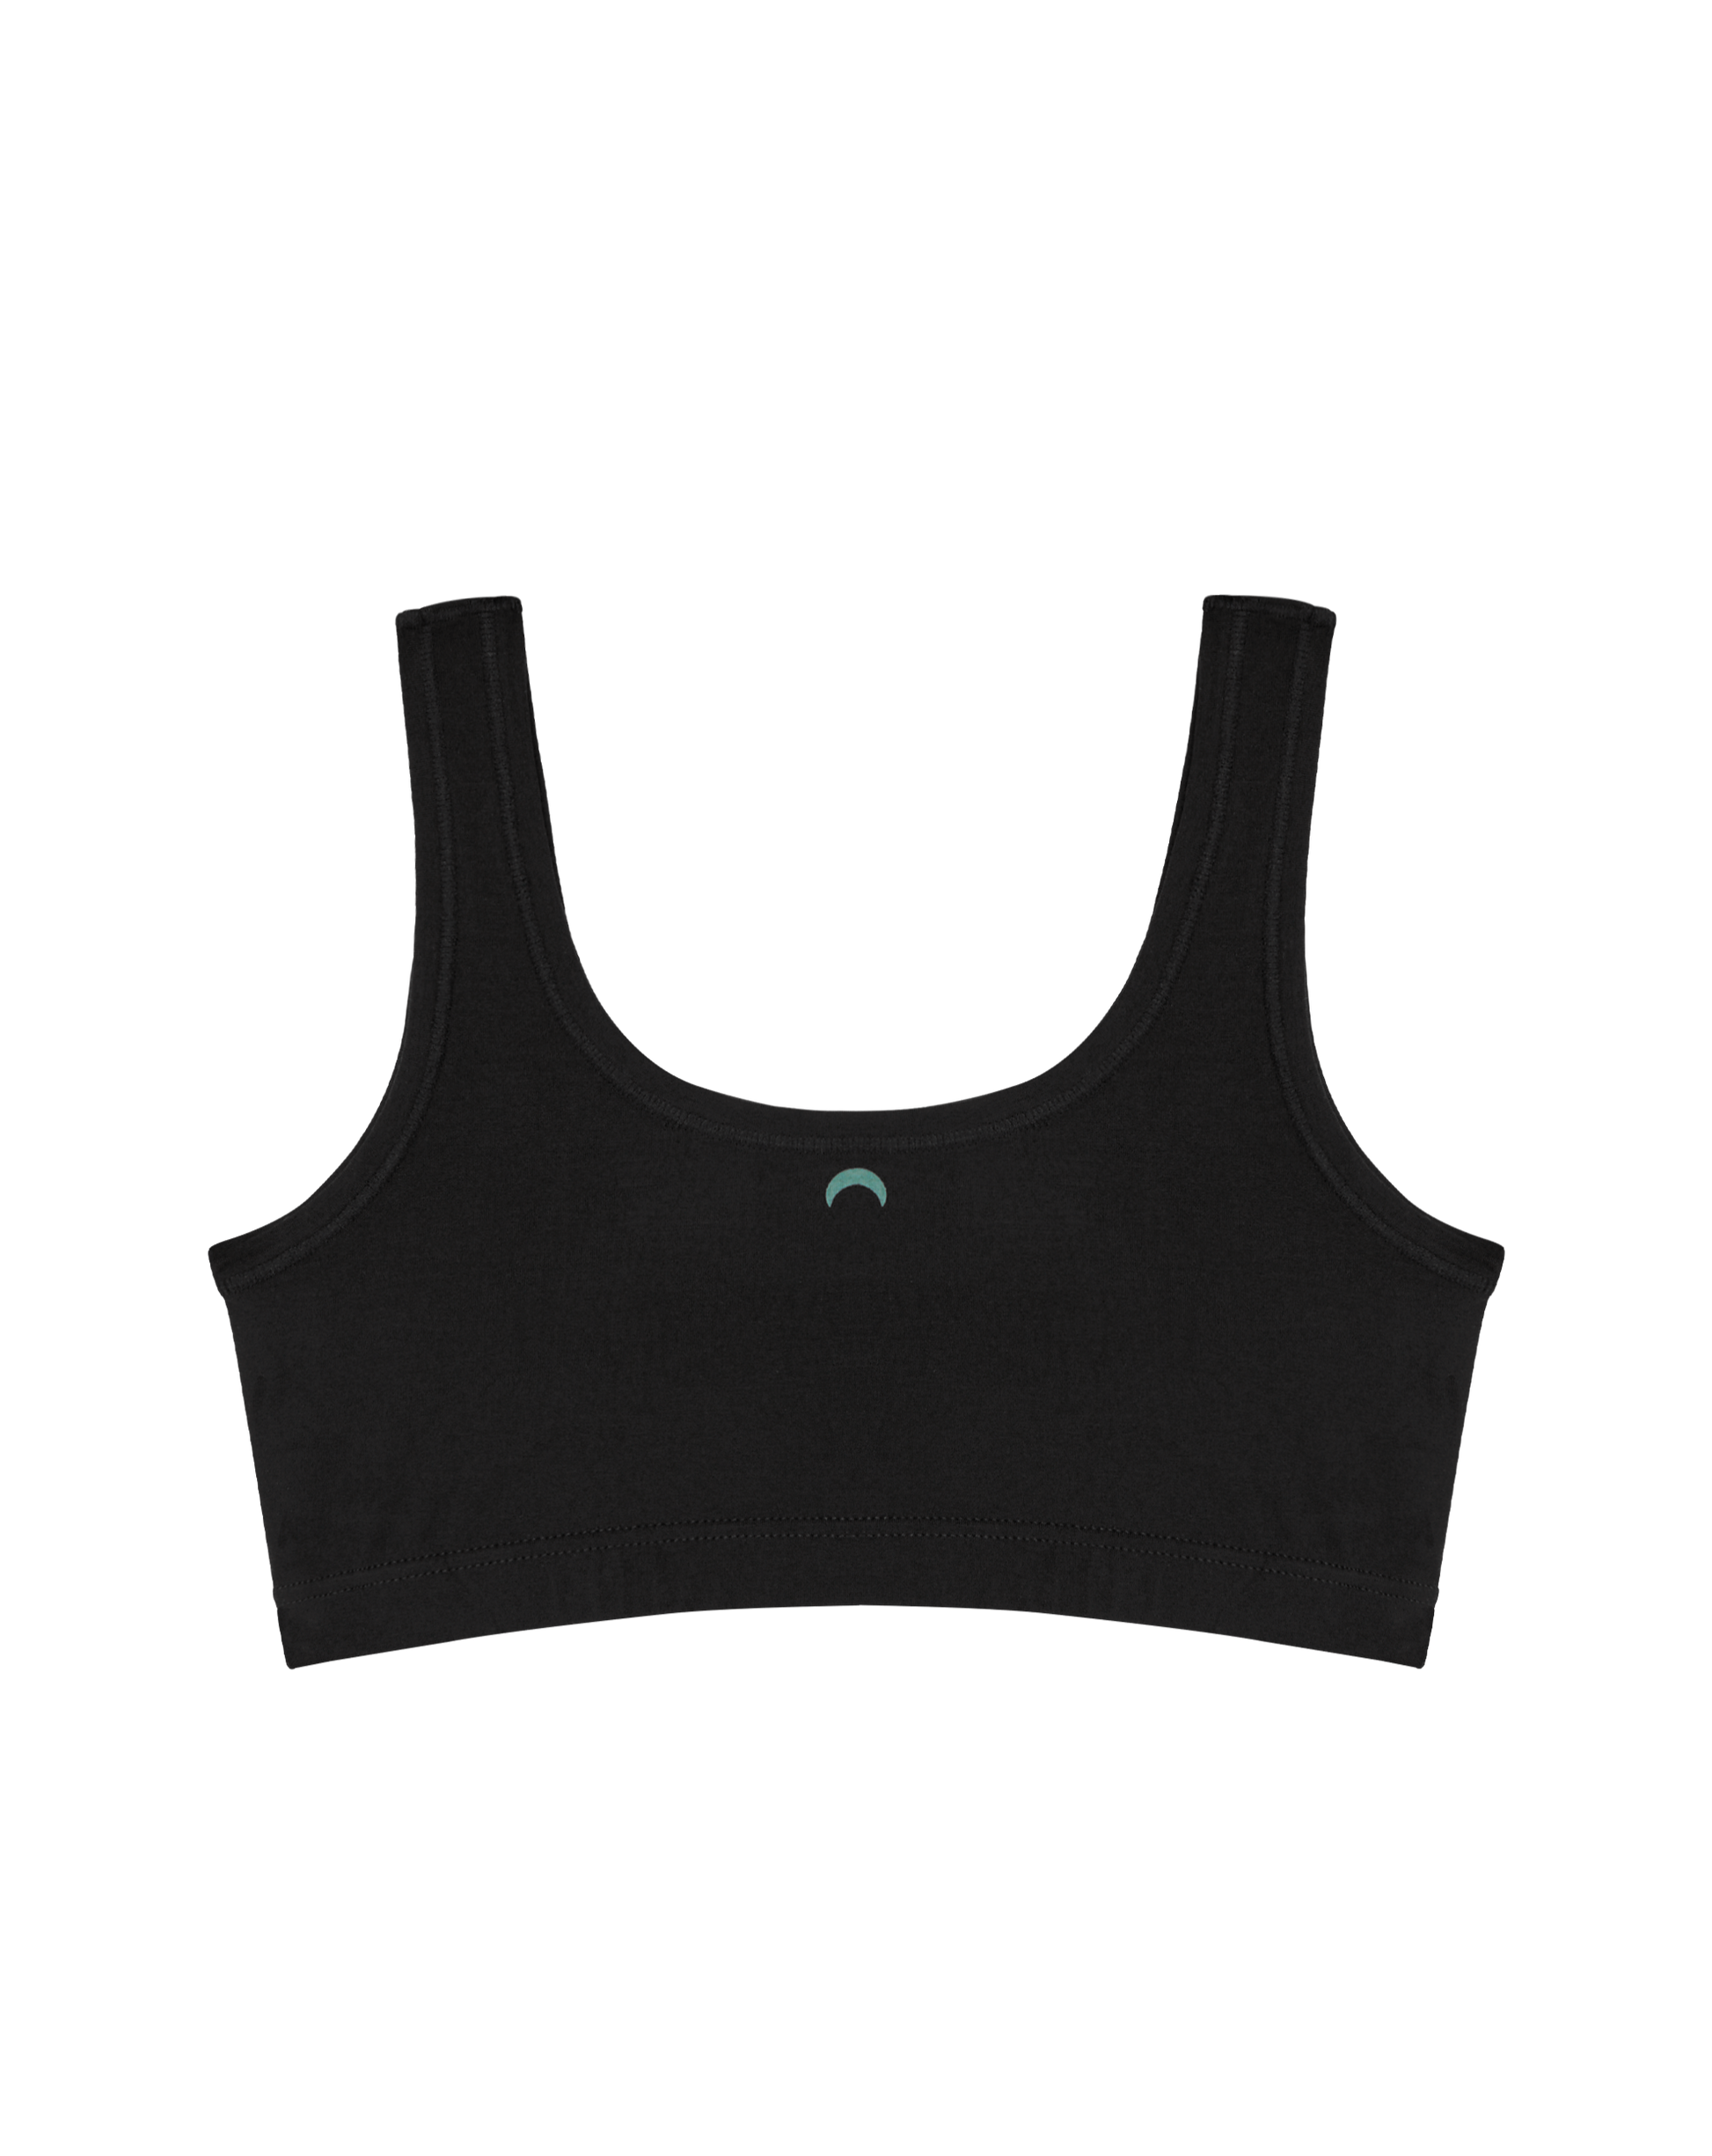 CLoxks Lihuahatter Bra,Lihuahatter Adjustable Super Supportive